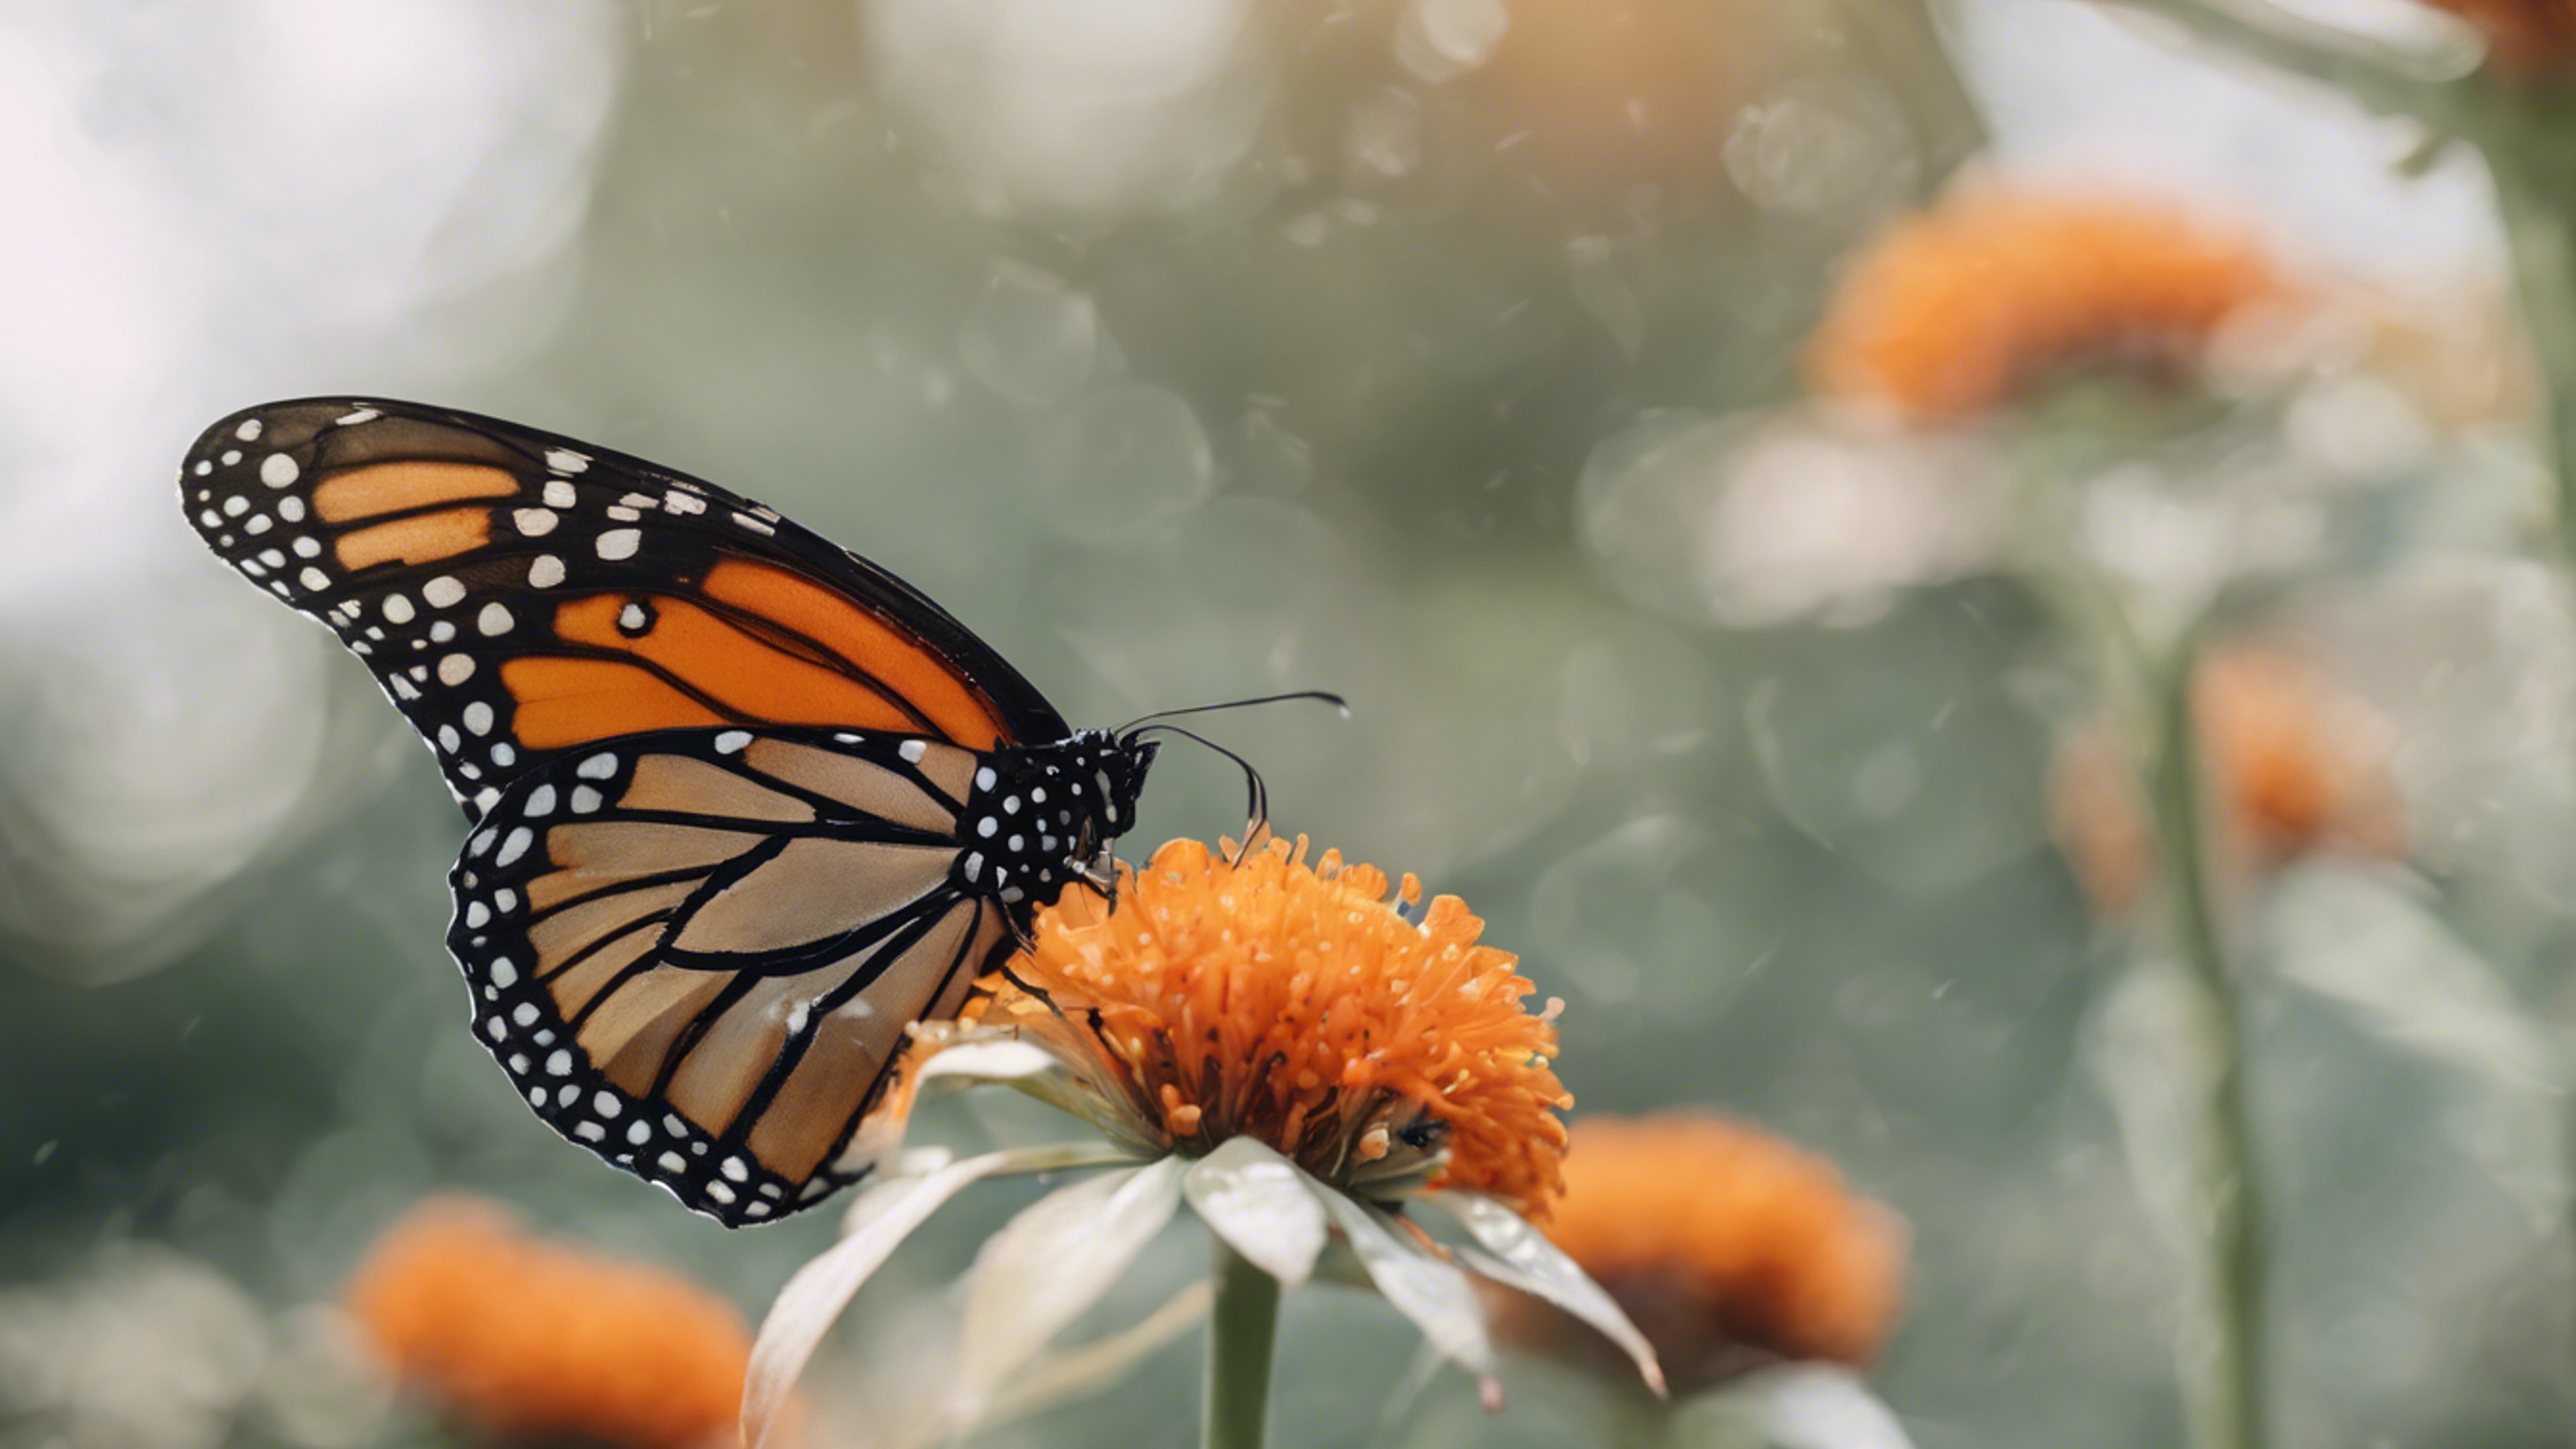 Macro close-up of a black-and-orange monarch butterfly perched on a flower. Behang[56c2f855106d400187c7]